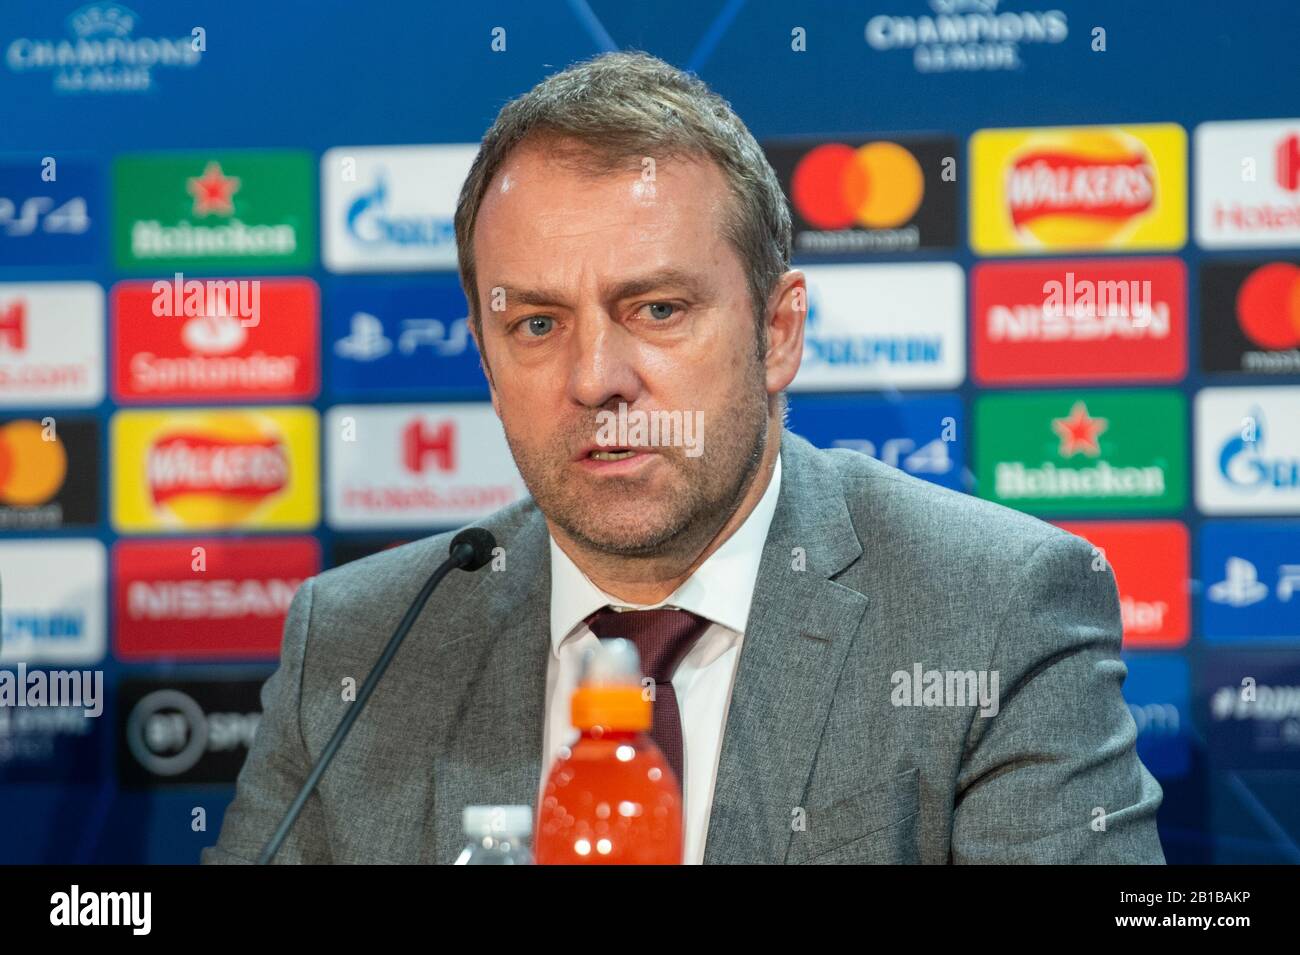 London, United Kingdom. 24 February 2020. Manager Hans-Dieter Flick speaks at a FC Bayern Munich pre-match press conference at Stamford Bridge ahead of their UEFA Champions League match against Chelsea FC on Tuesday 25th February 2020. Credit: Peter Manning/Alamy Live News Stock Photo